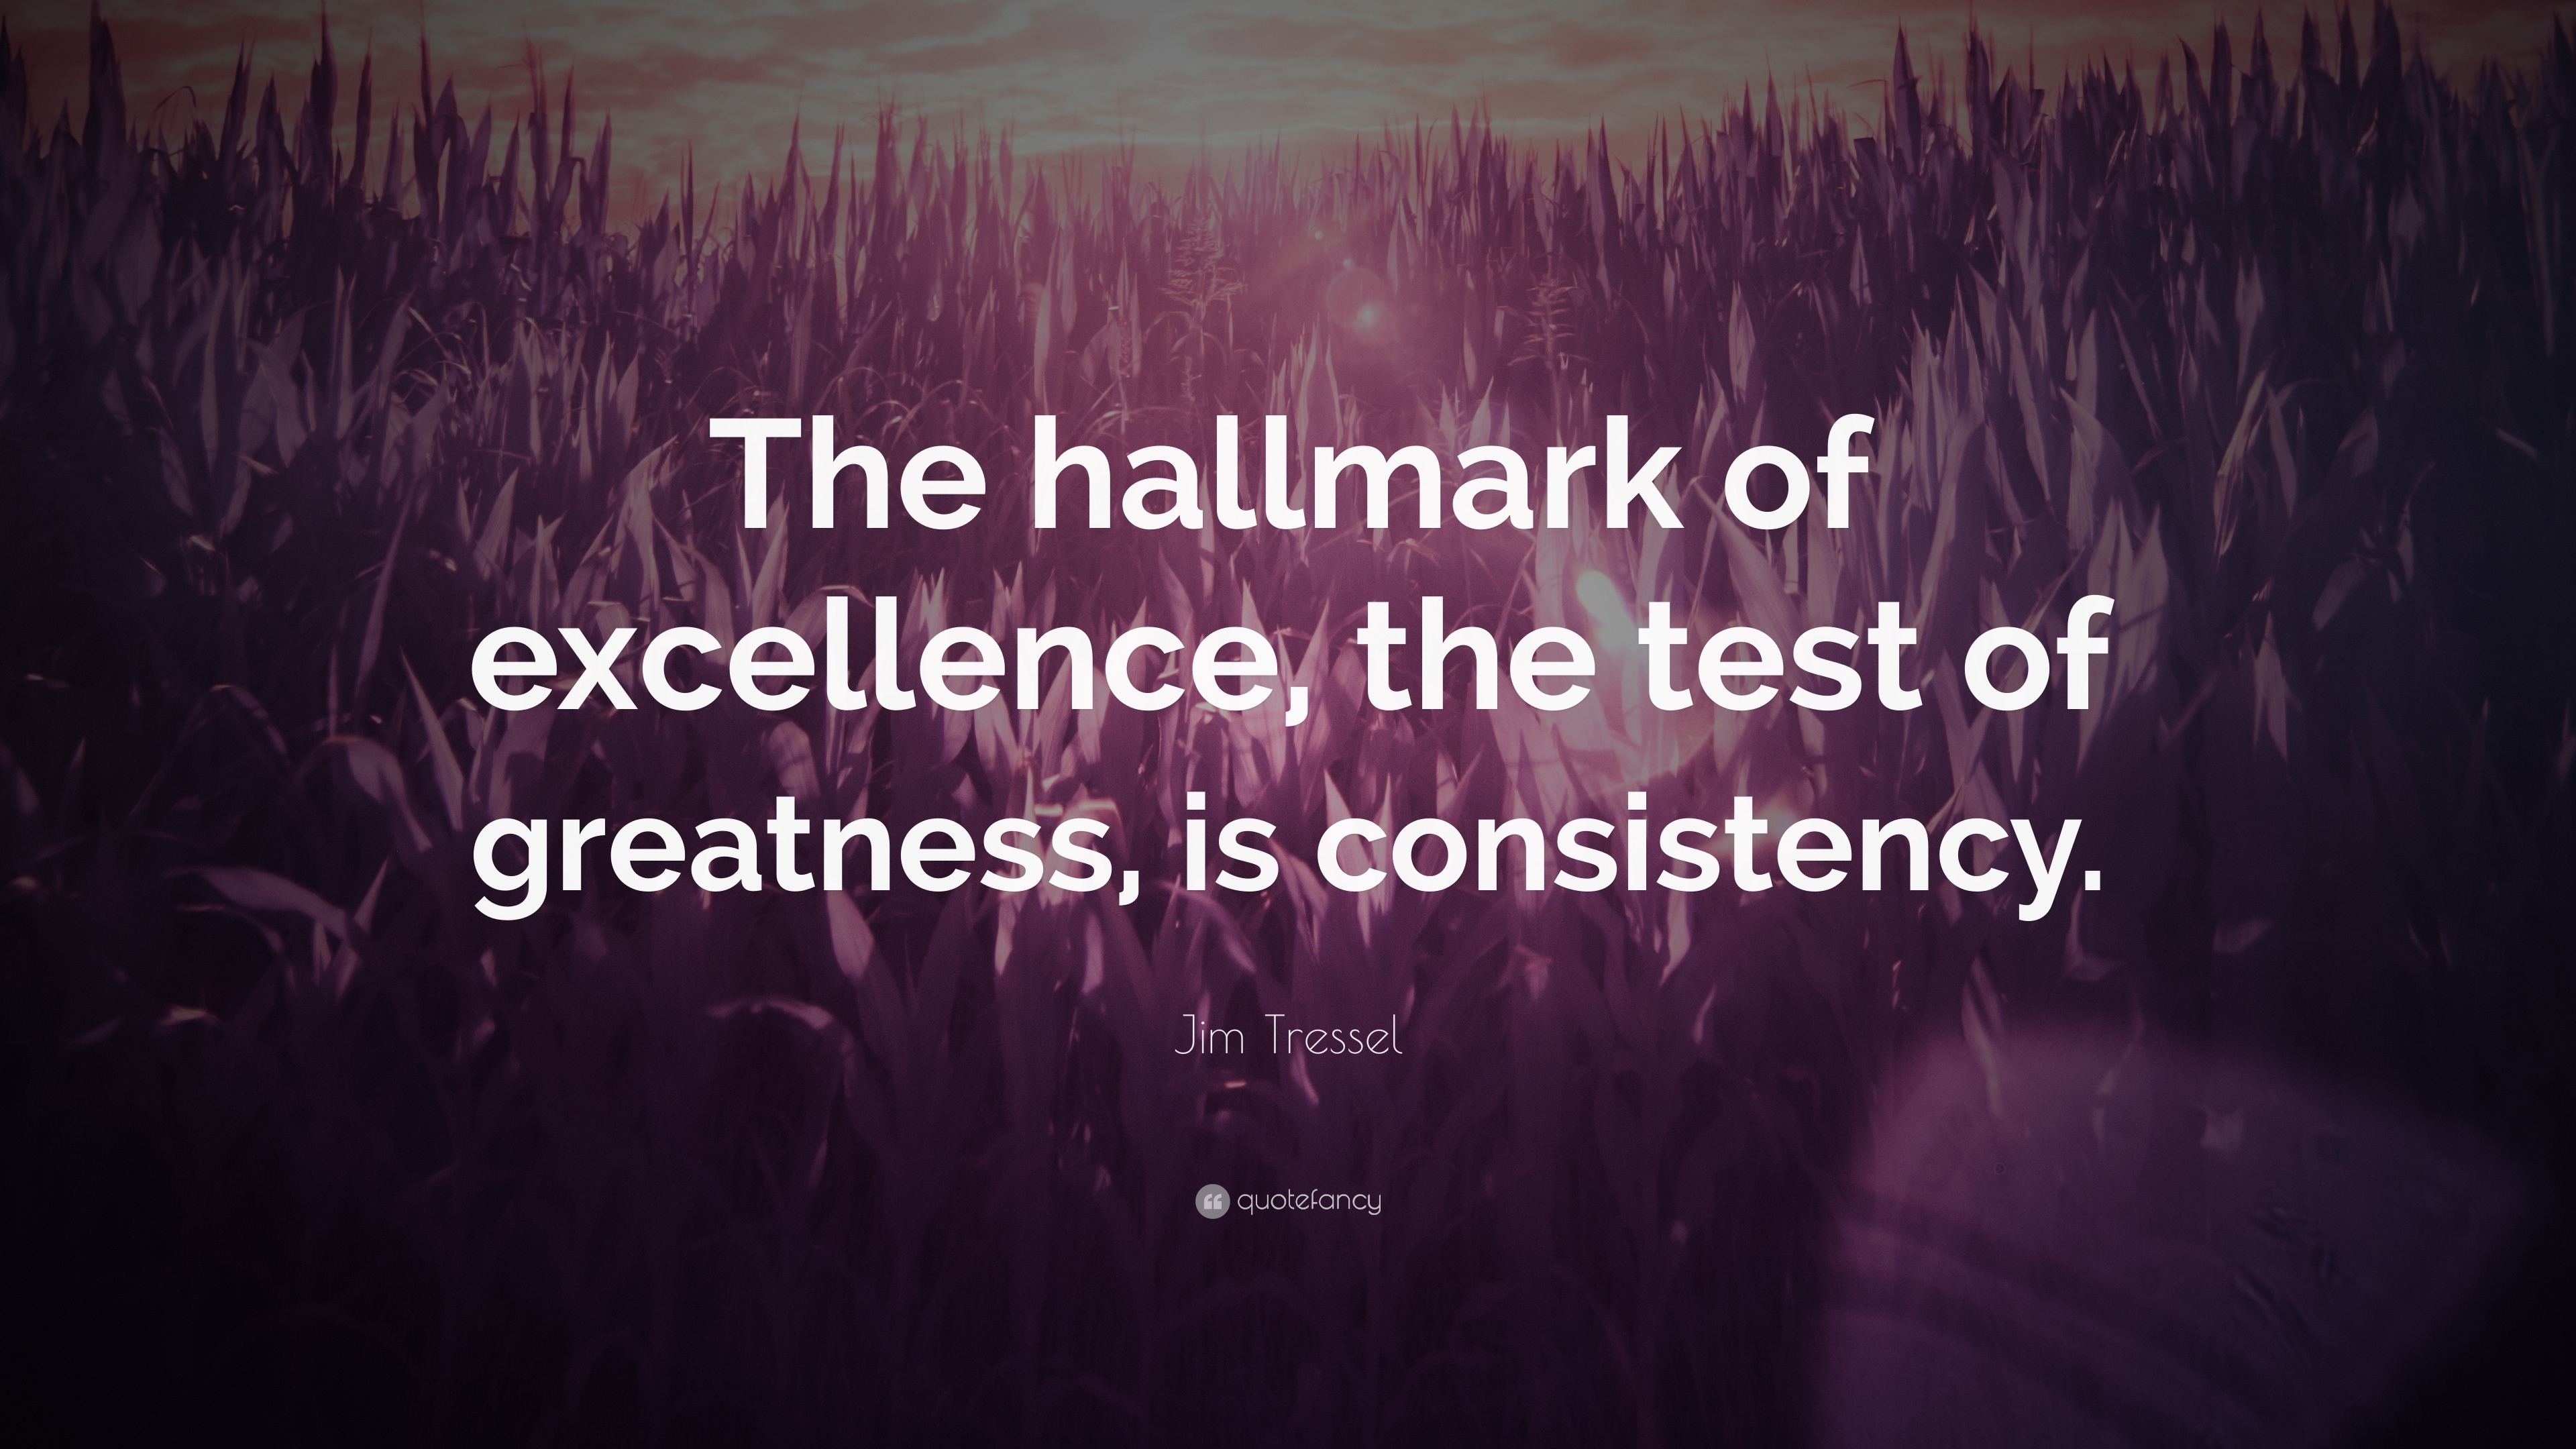 Hallmarks of Excellence ©